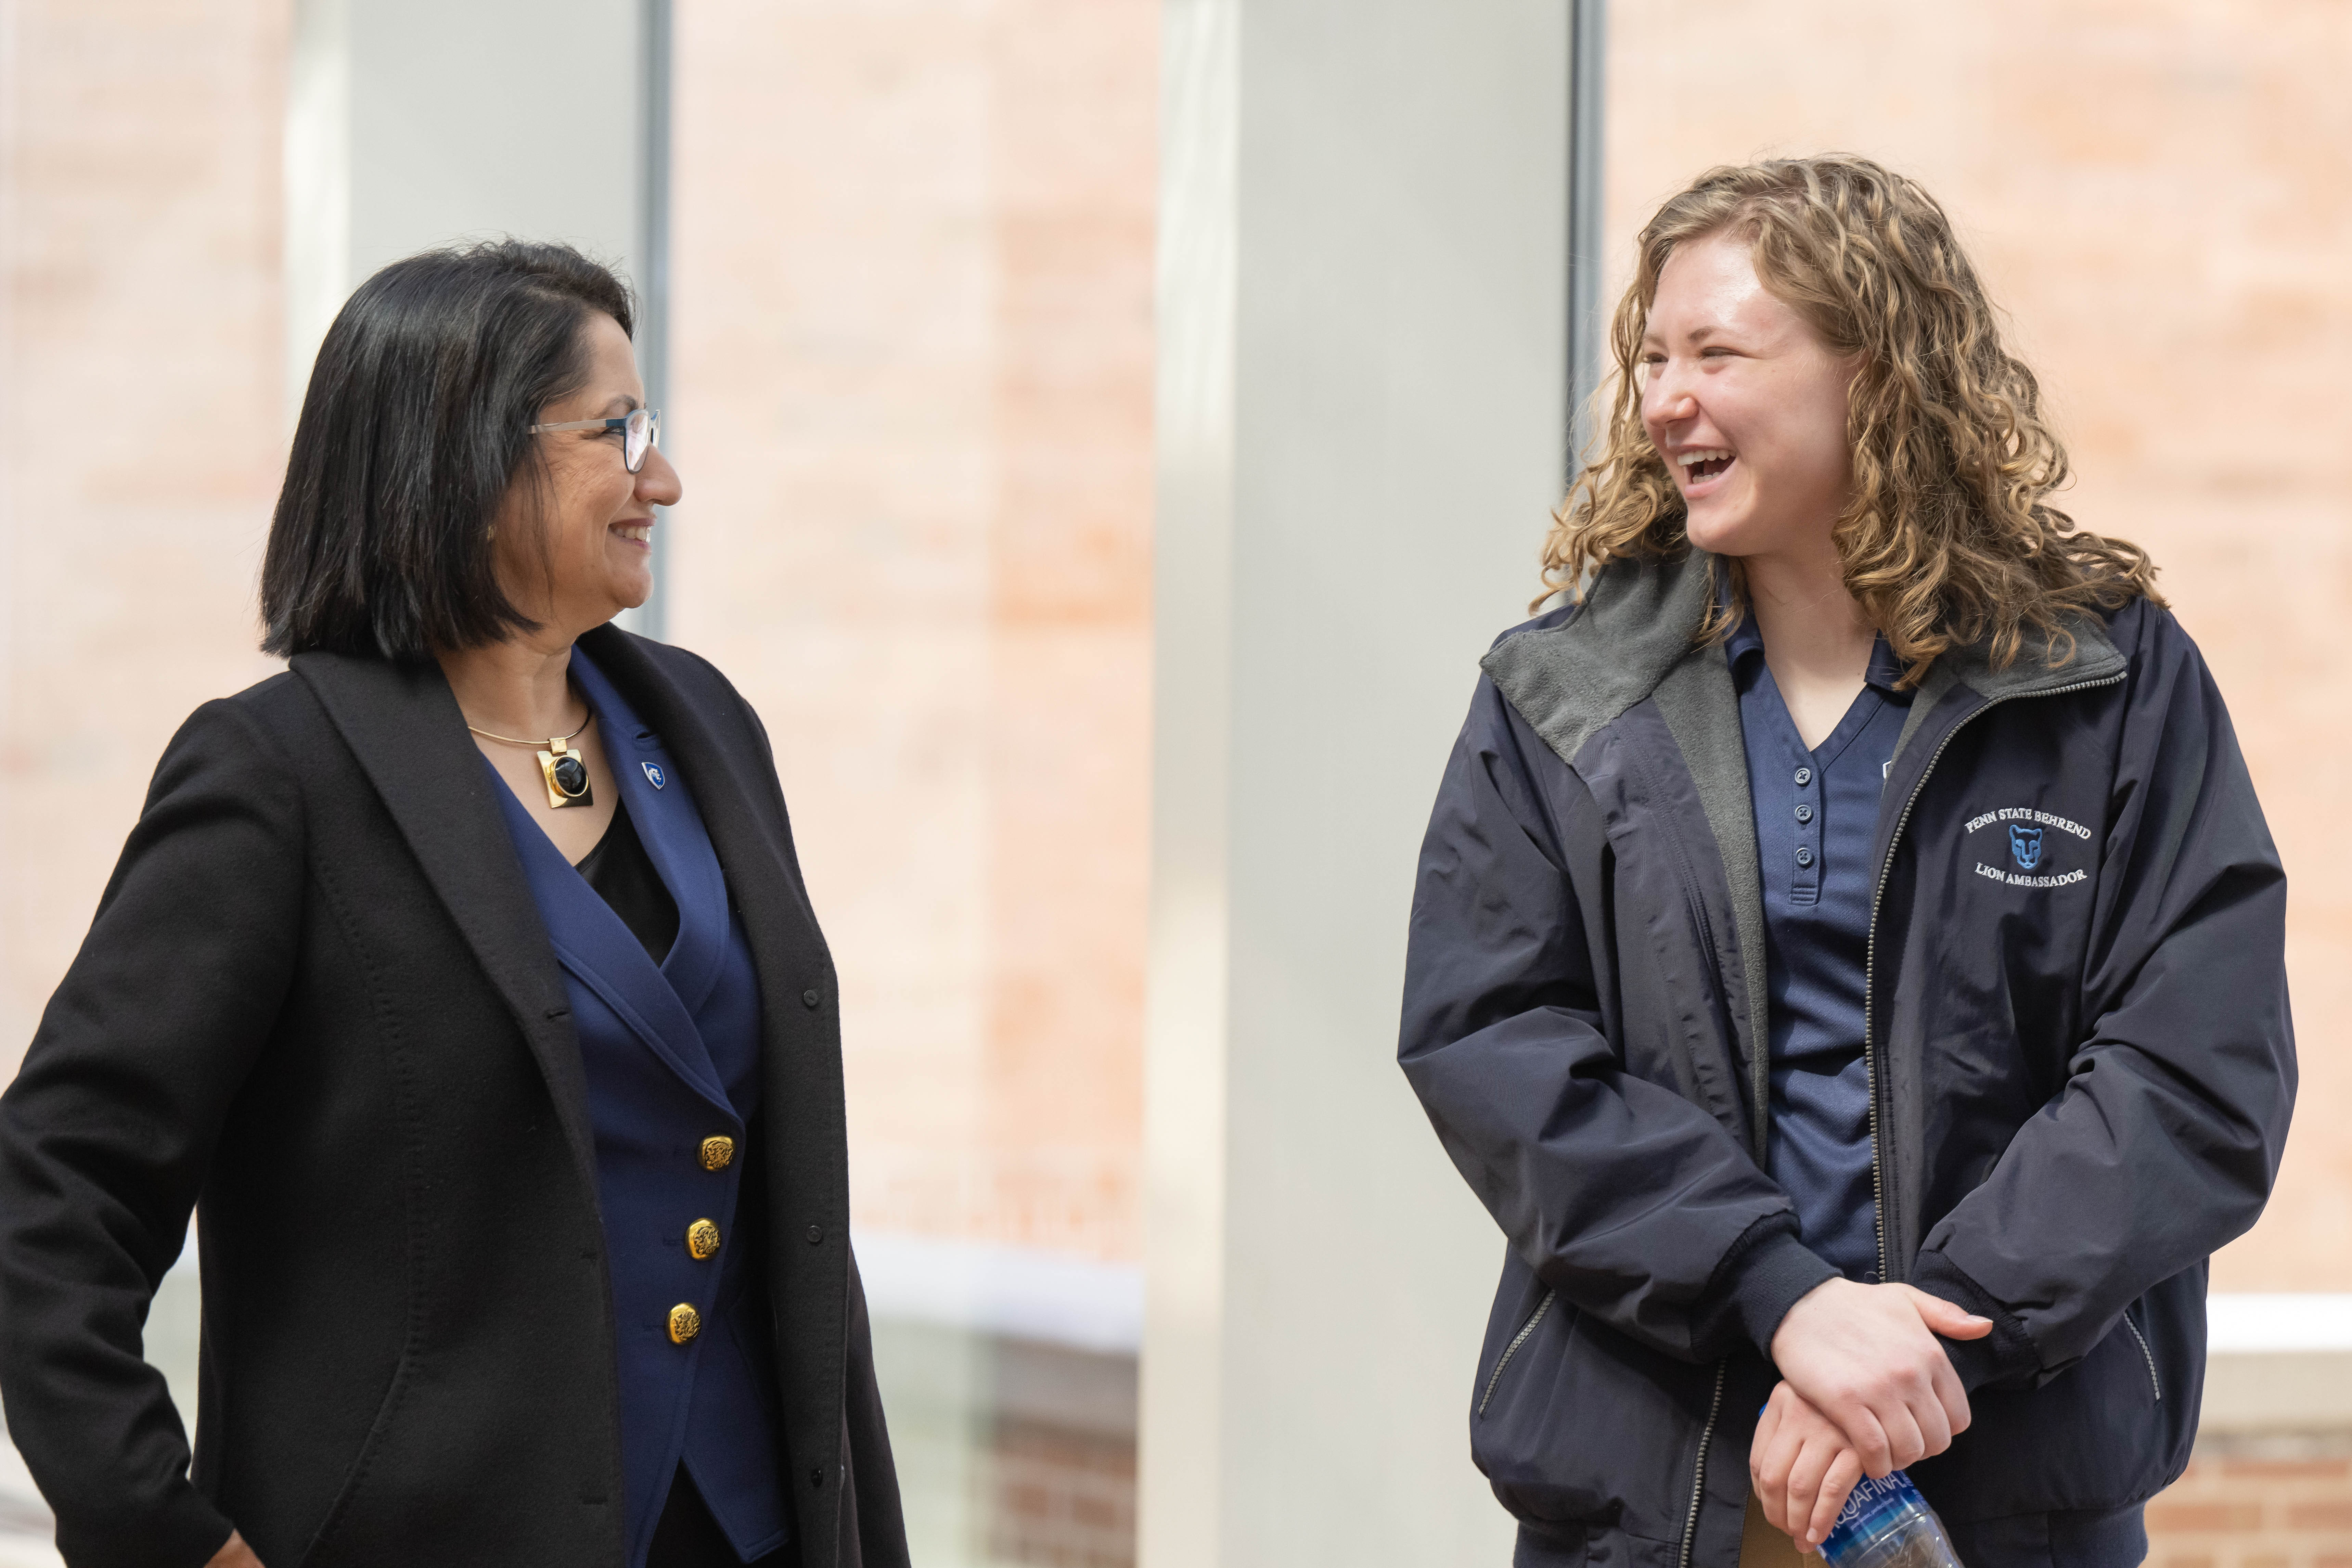 Neeli Bendapudi stands next to a female college student as they engage in conversation and laugh.